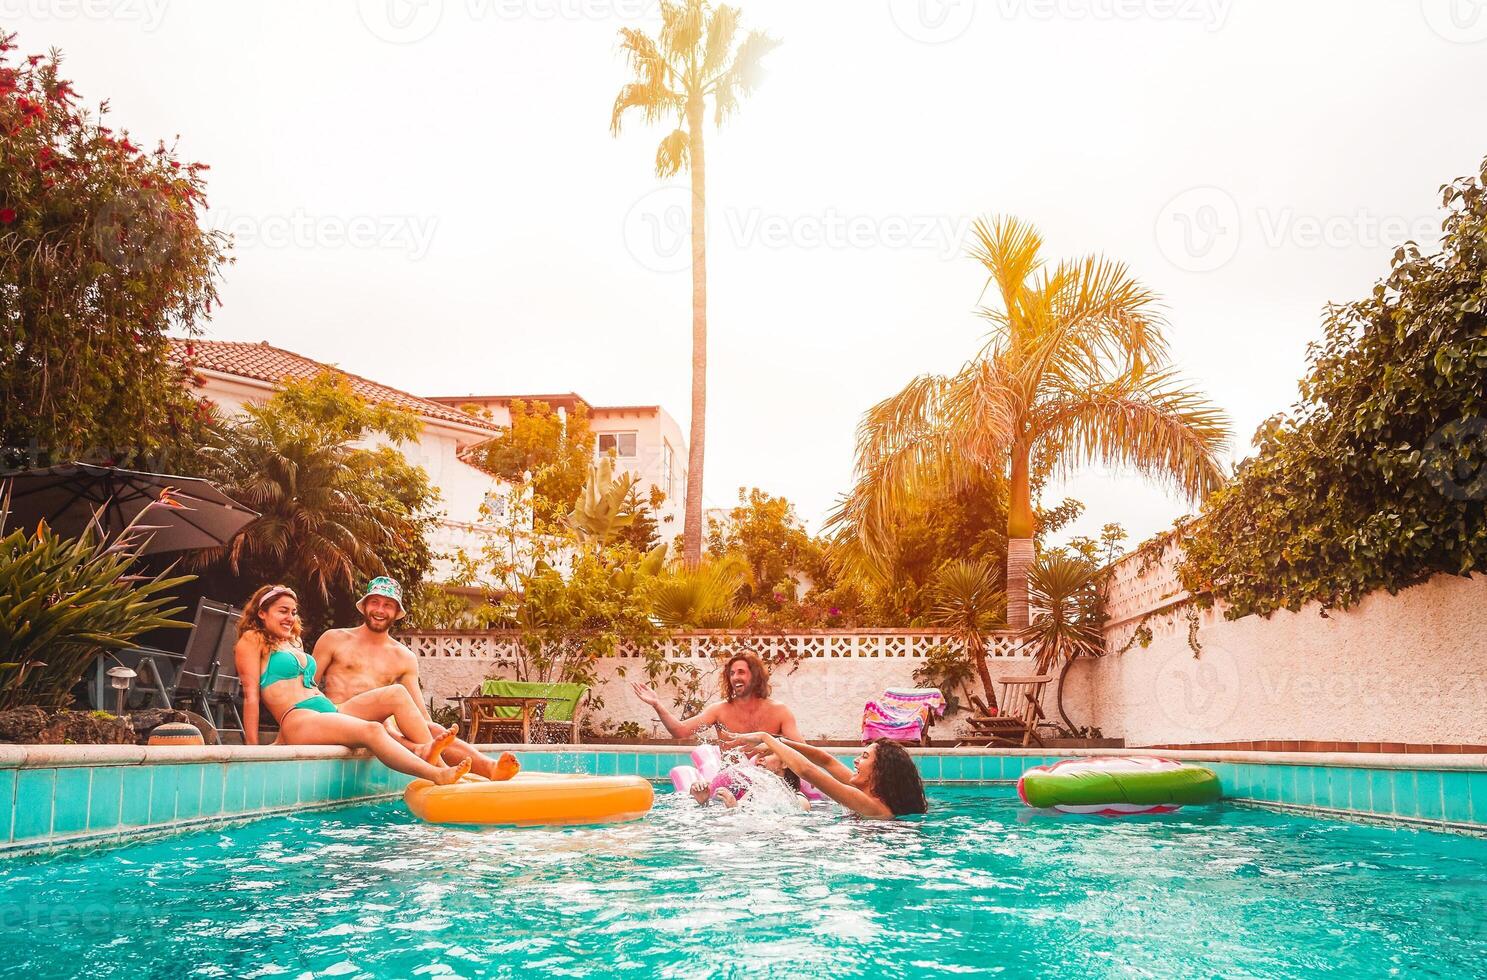 Group of happy friends relaxing in swimming pool - Young people having fun floating on air lilo during summer tropical vacation - Friendship, holidays and youth lifestyle concept photo